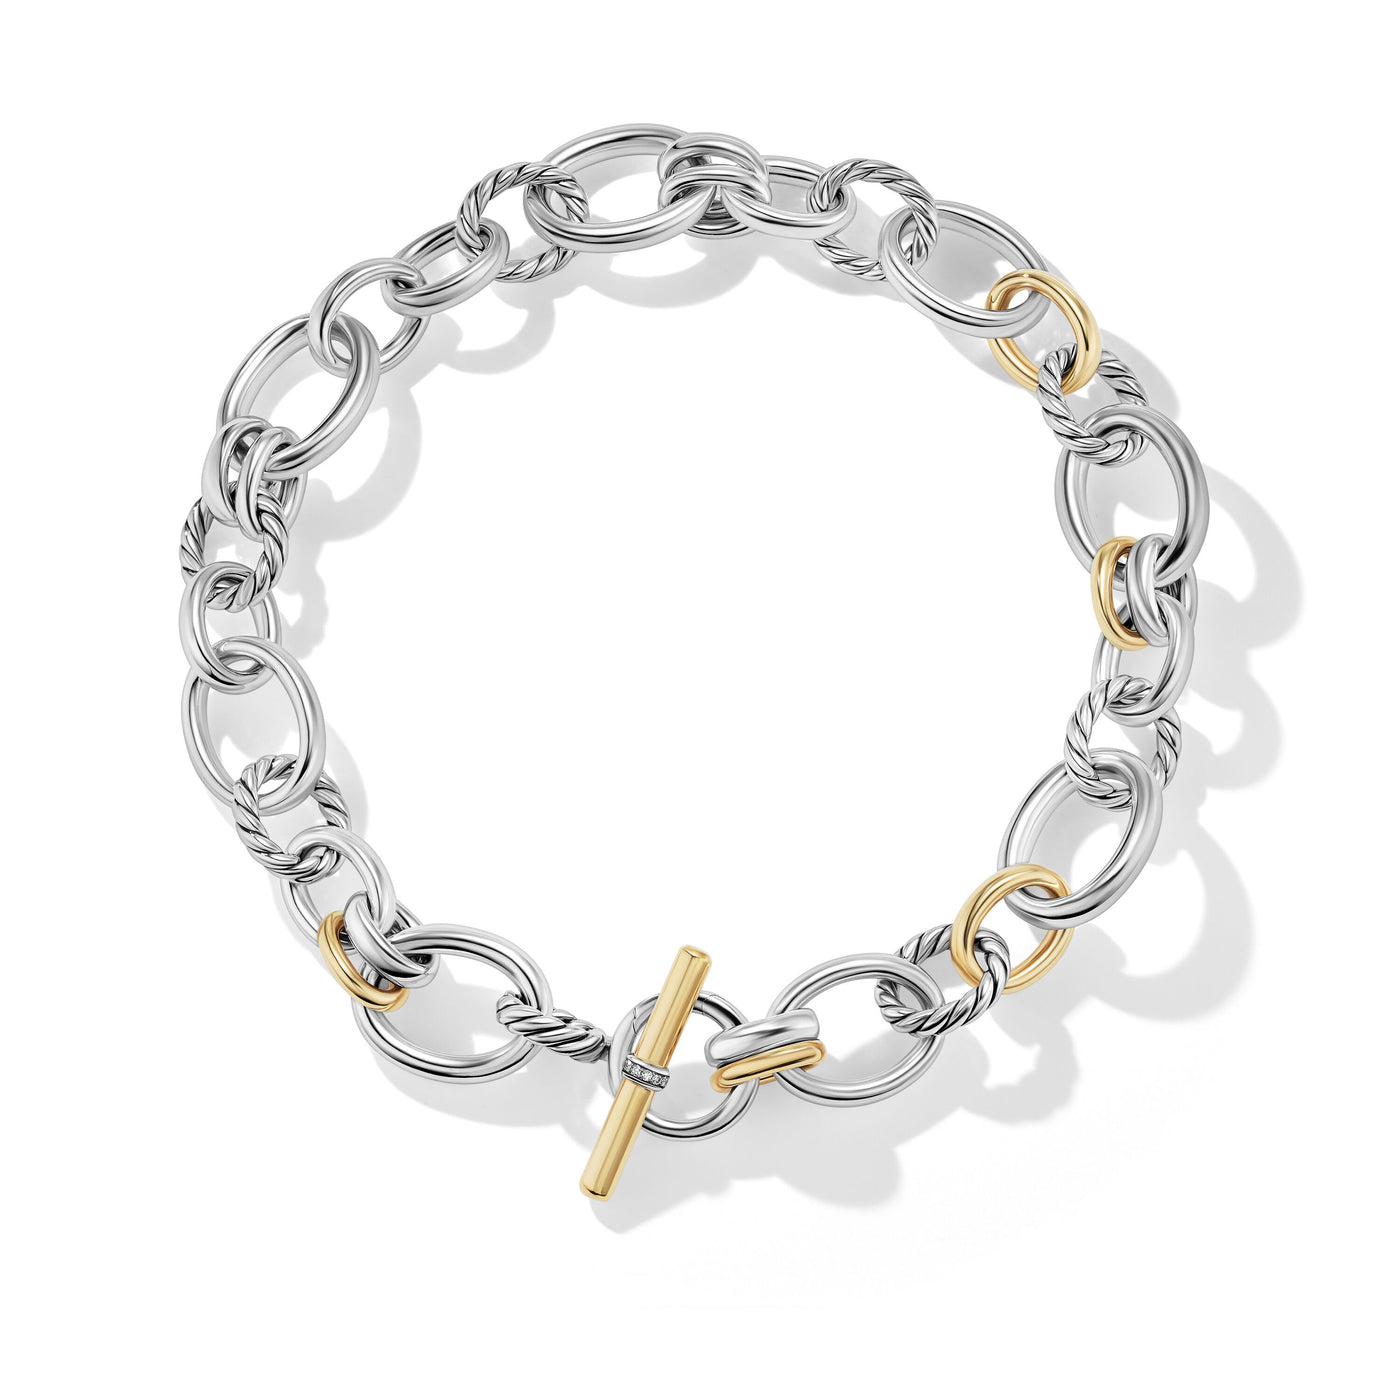 DY Mercer? Chain Necklace in Sterling Silver with 18K Yellow Gold and Diamonds, 25mm